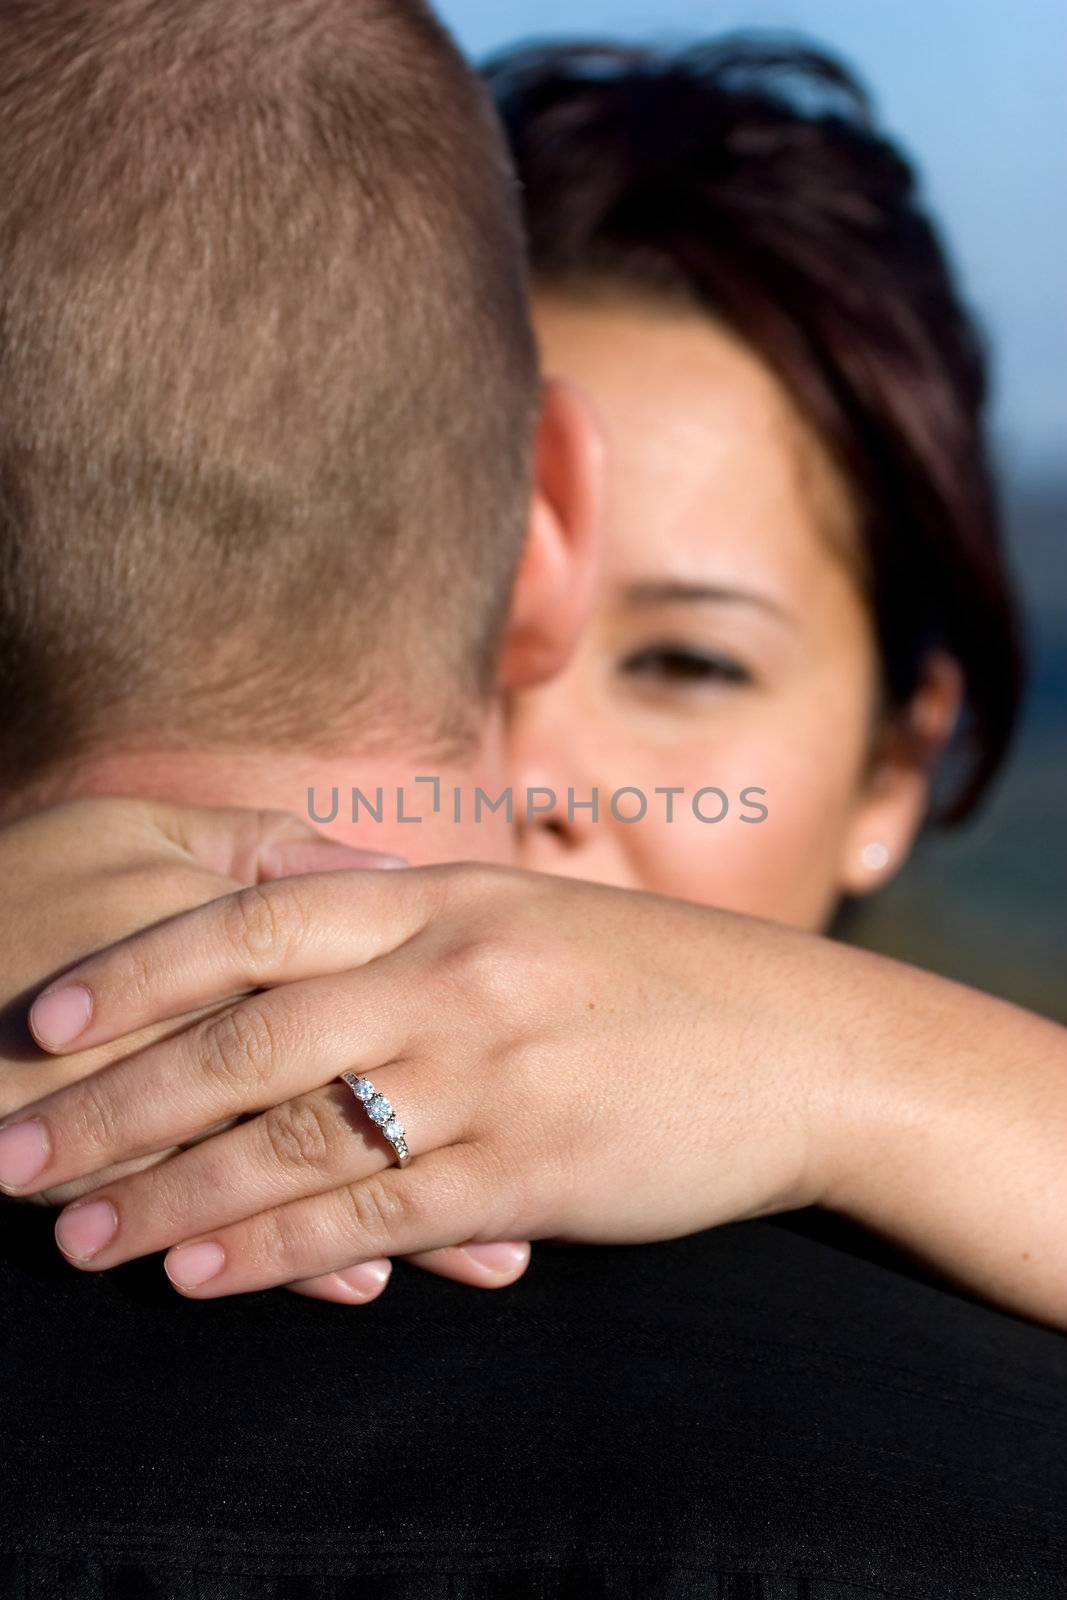 A young happy couple that just got engaged.  Shallow depth of field with focus on the diamond engagement ring.